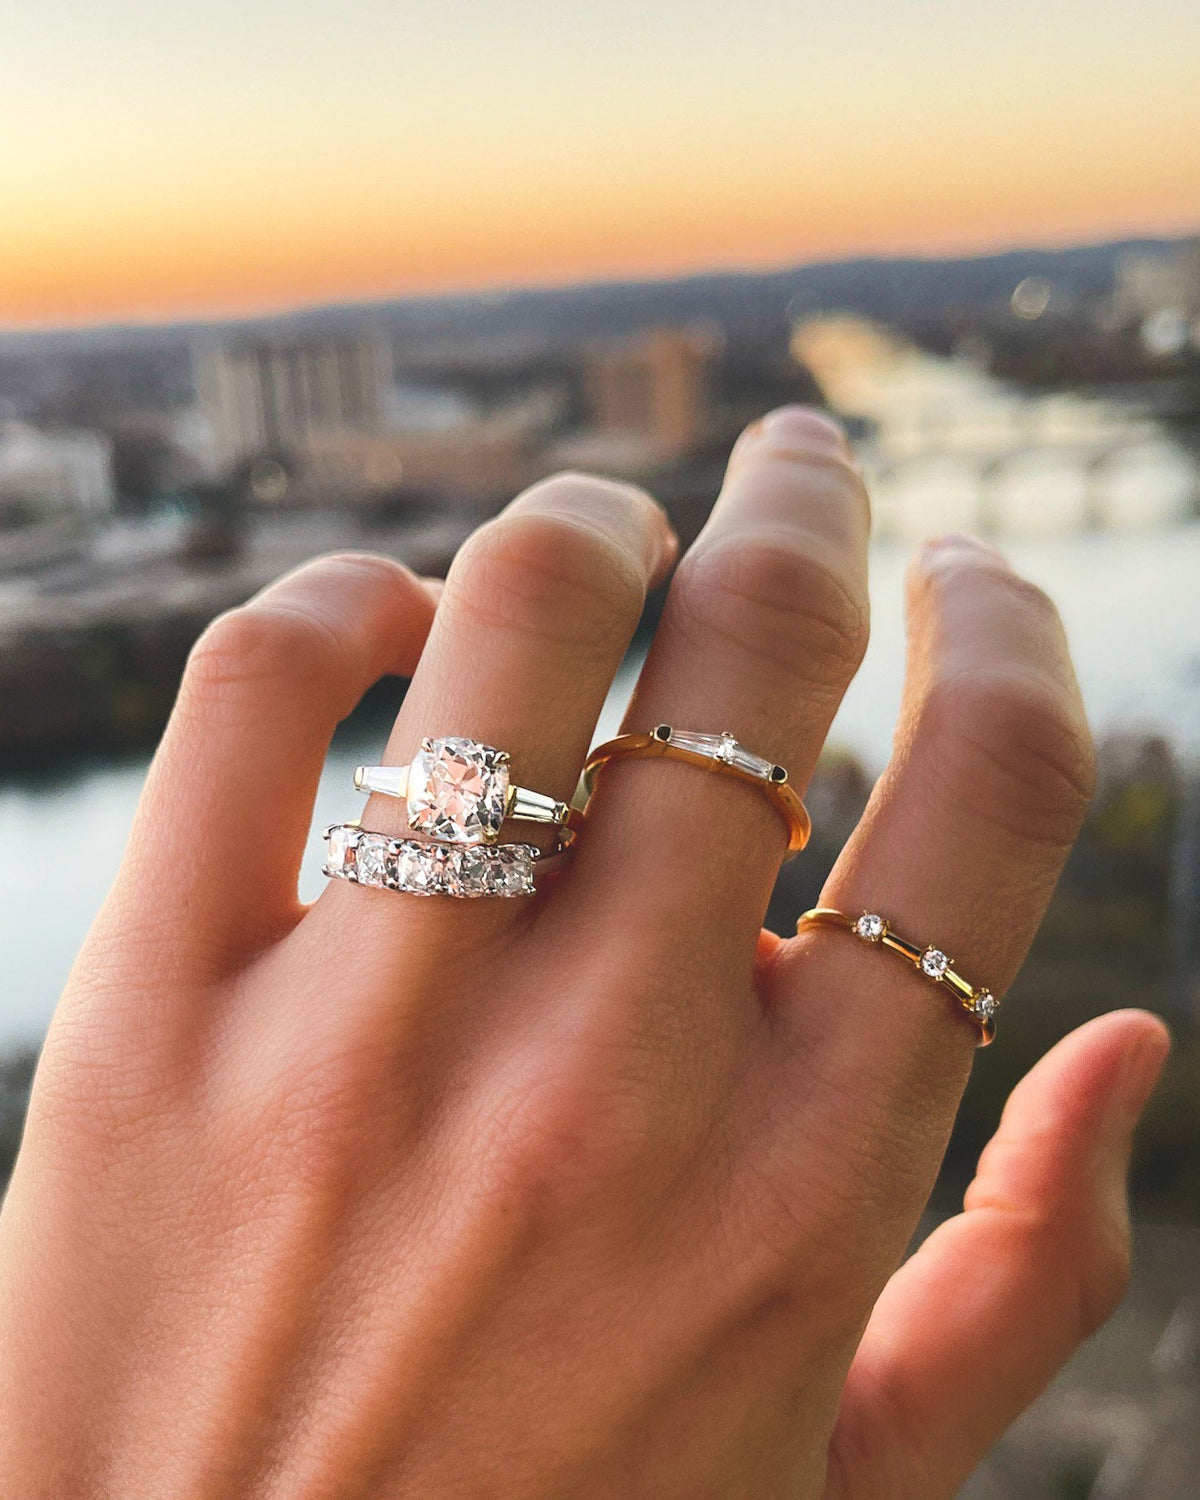 OVAL ENGAGEMENT RINGS WITH WEDDING BANDS - Diamonds By Raymond Lee